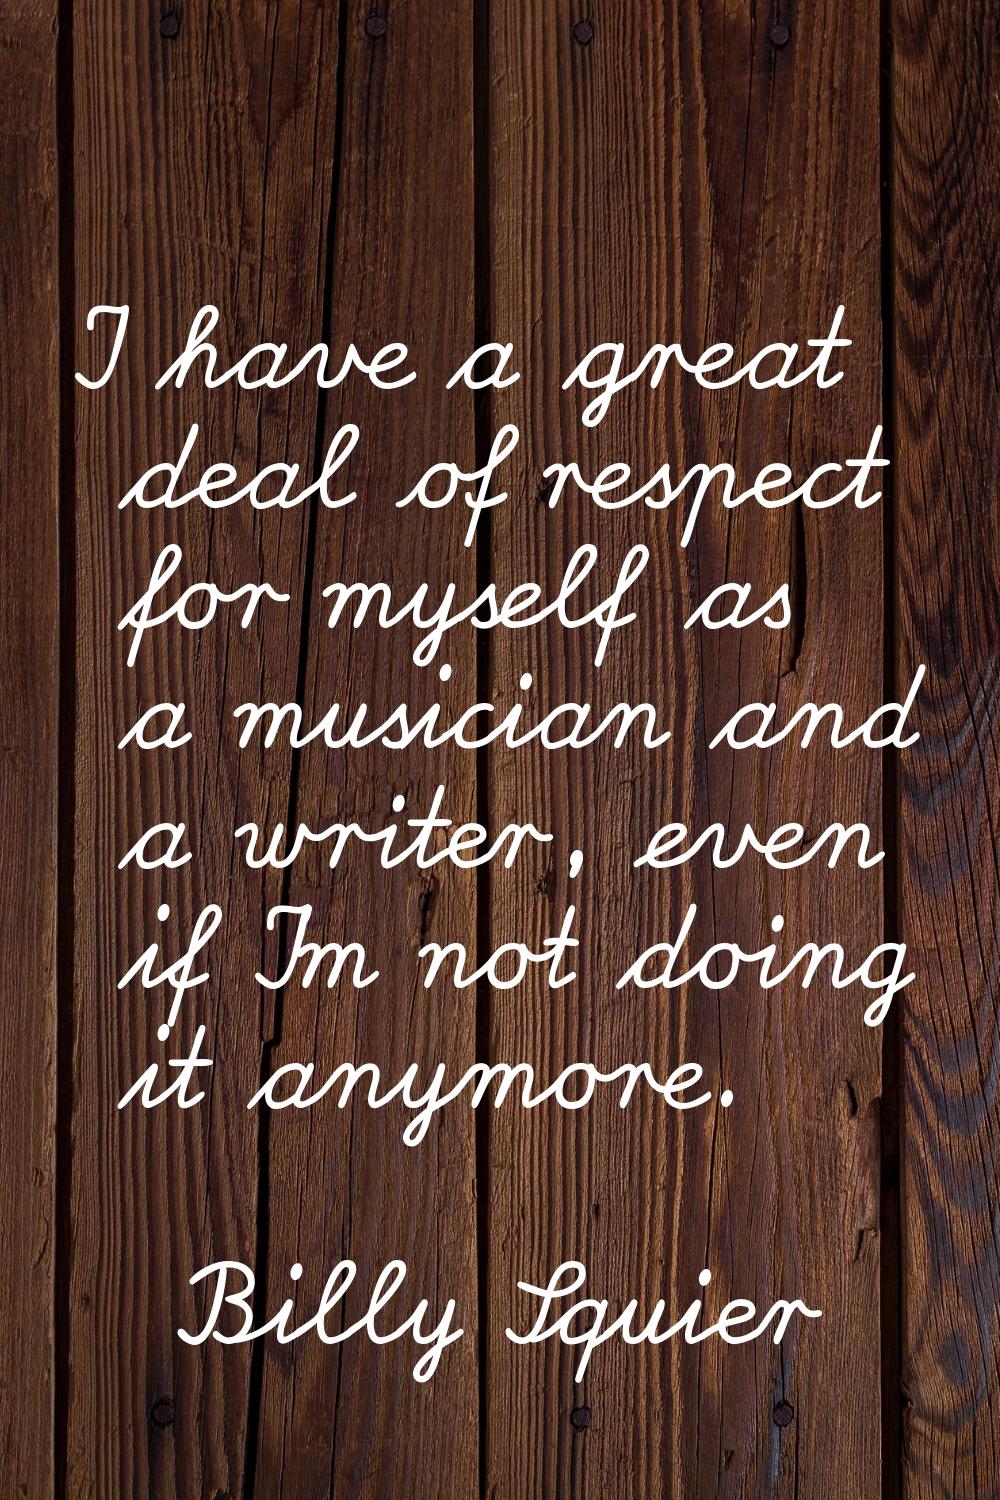 I have a great deal of respect for myself as a musician and a writer, even if I'm not doing it anym